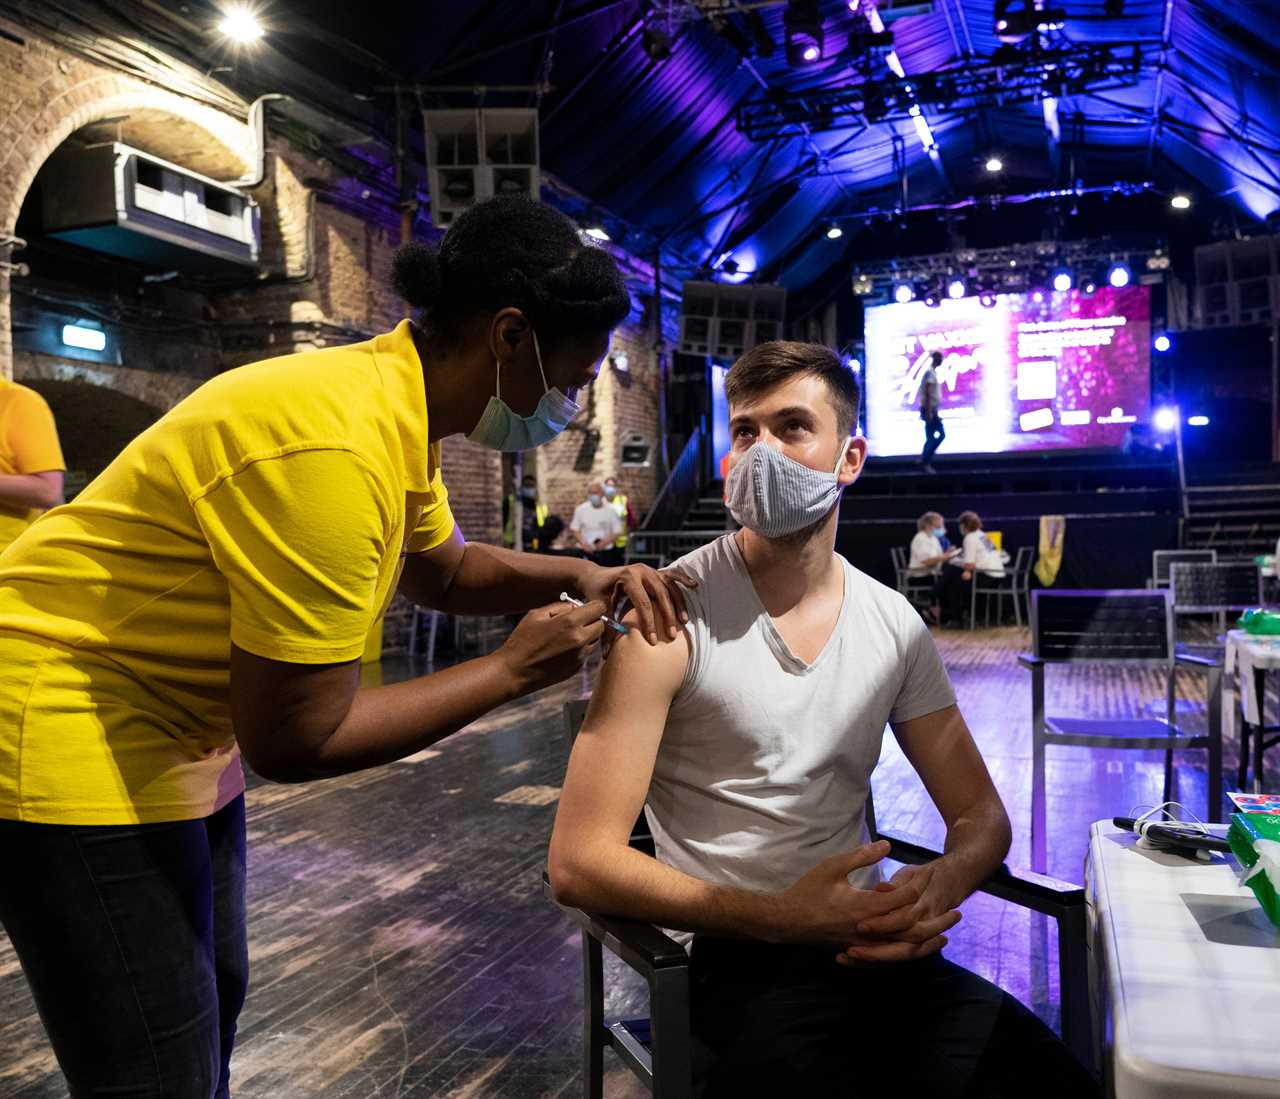 Covid vaccinations doled out at famous Heaven nightclub in push to get youngsters jabbed